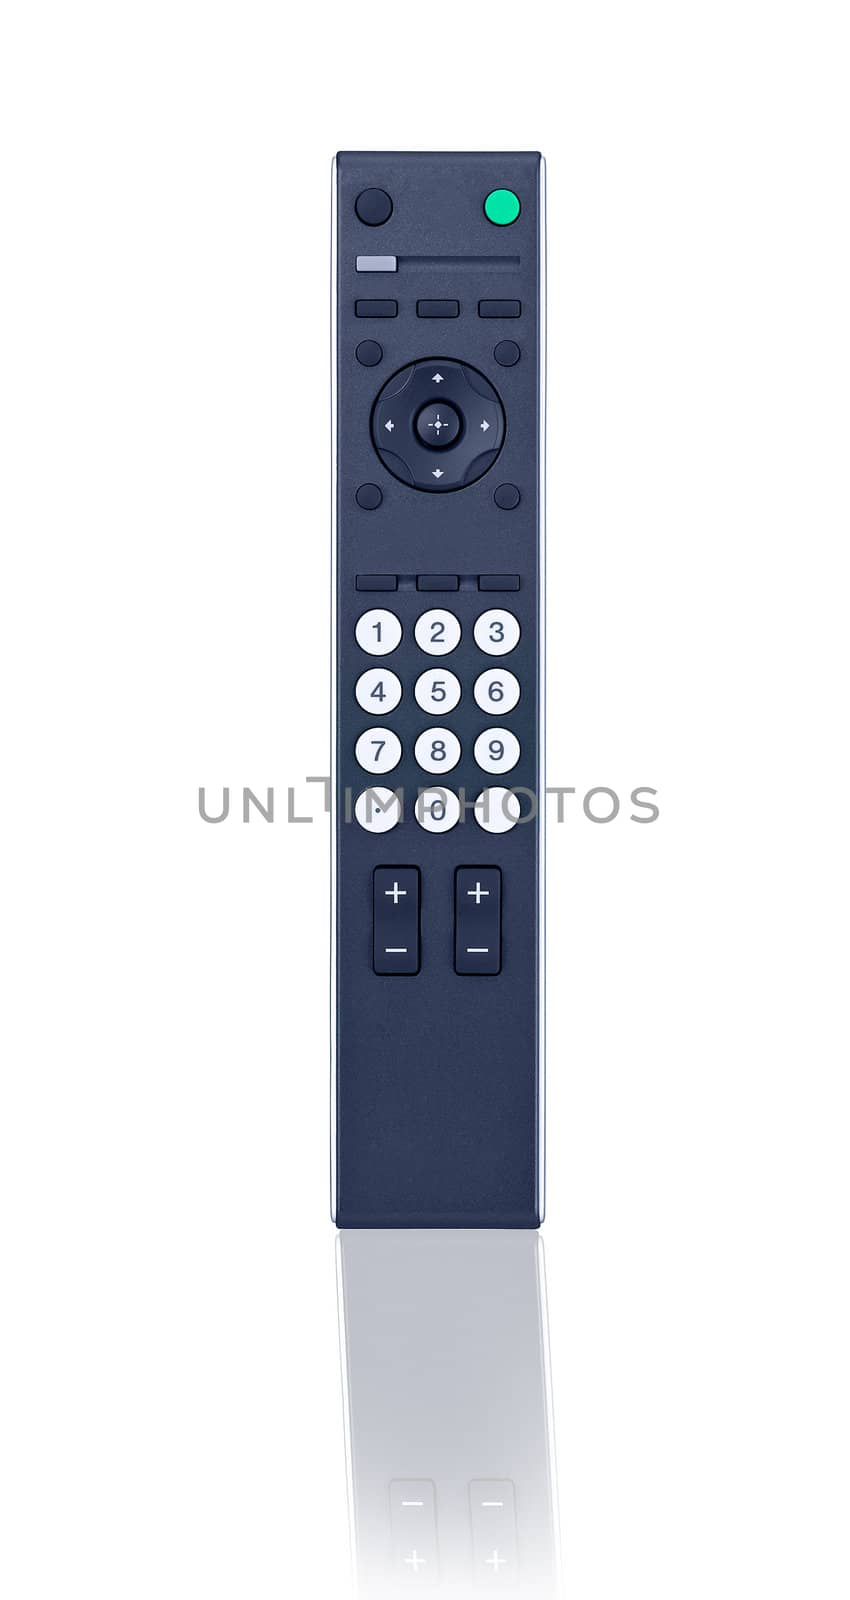 TV remote control isolated on white